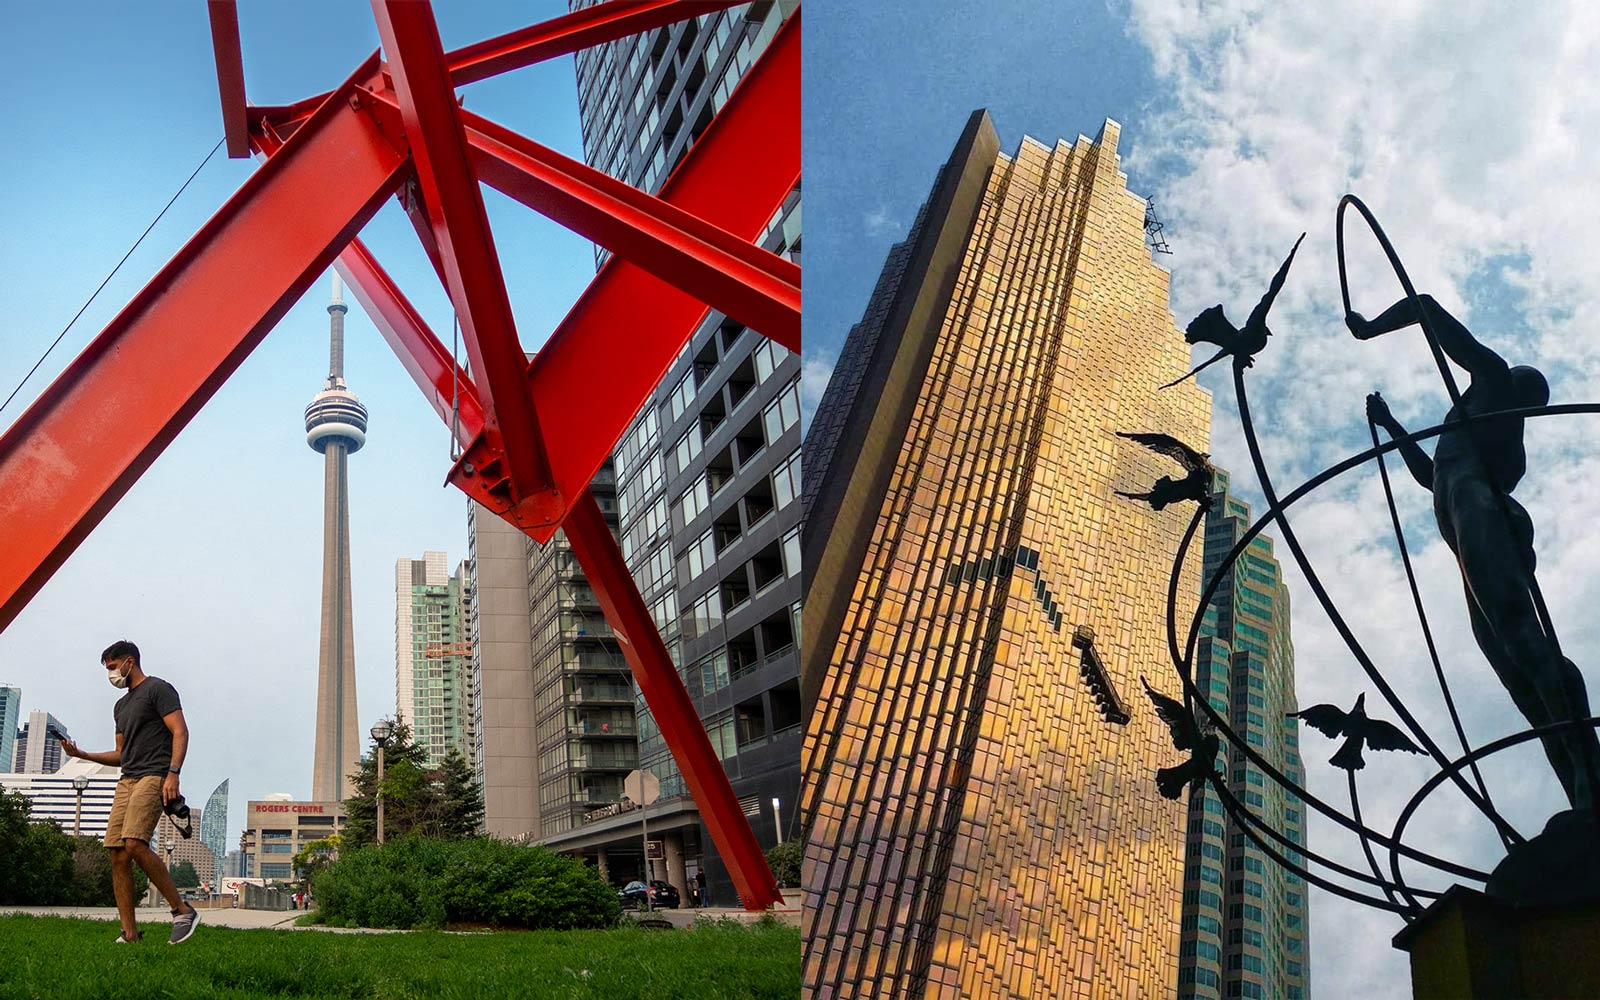 Public Art and Architecture Walking Tour in Downtown West Toronto (Join our Tdot Iconic Photo Walk)